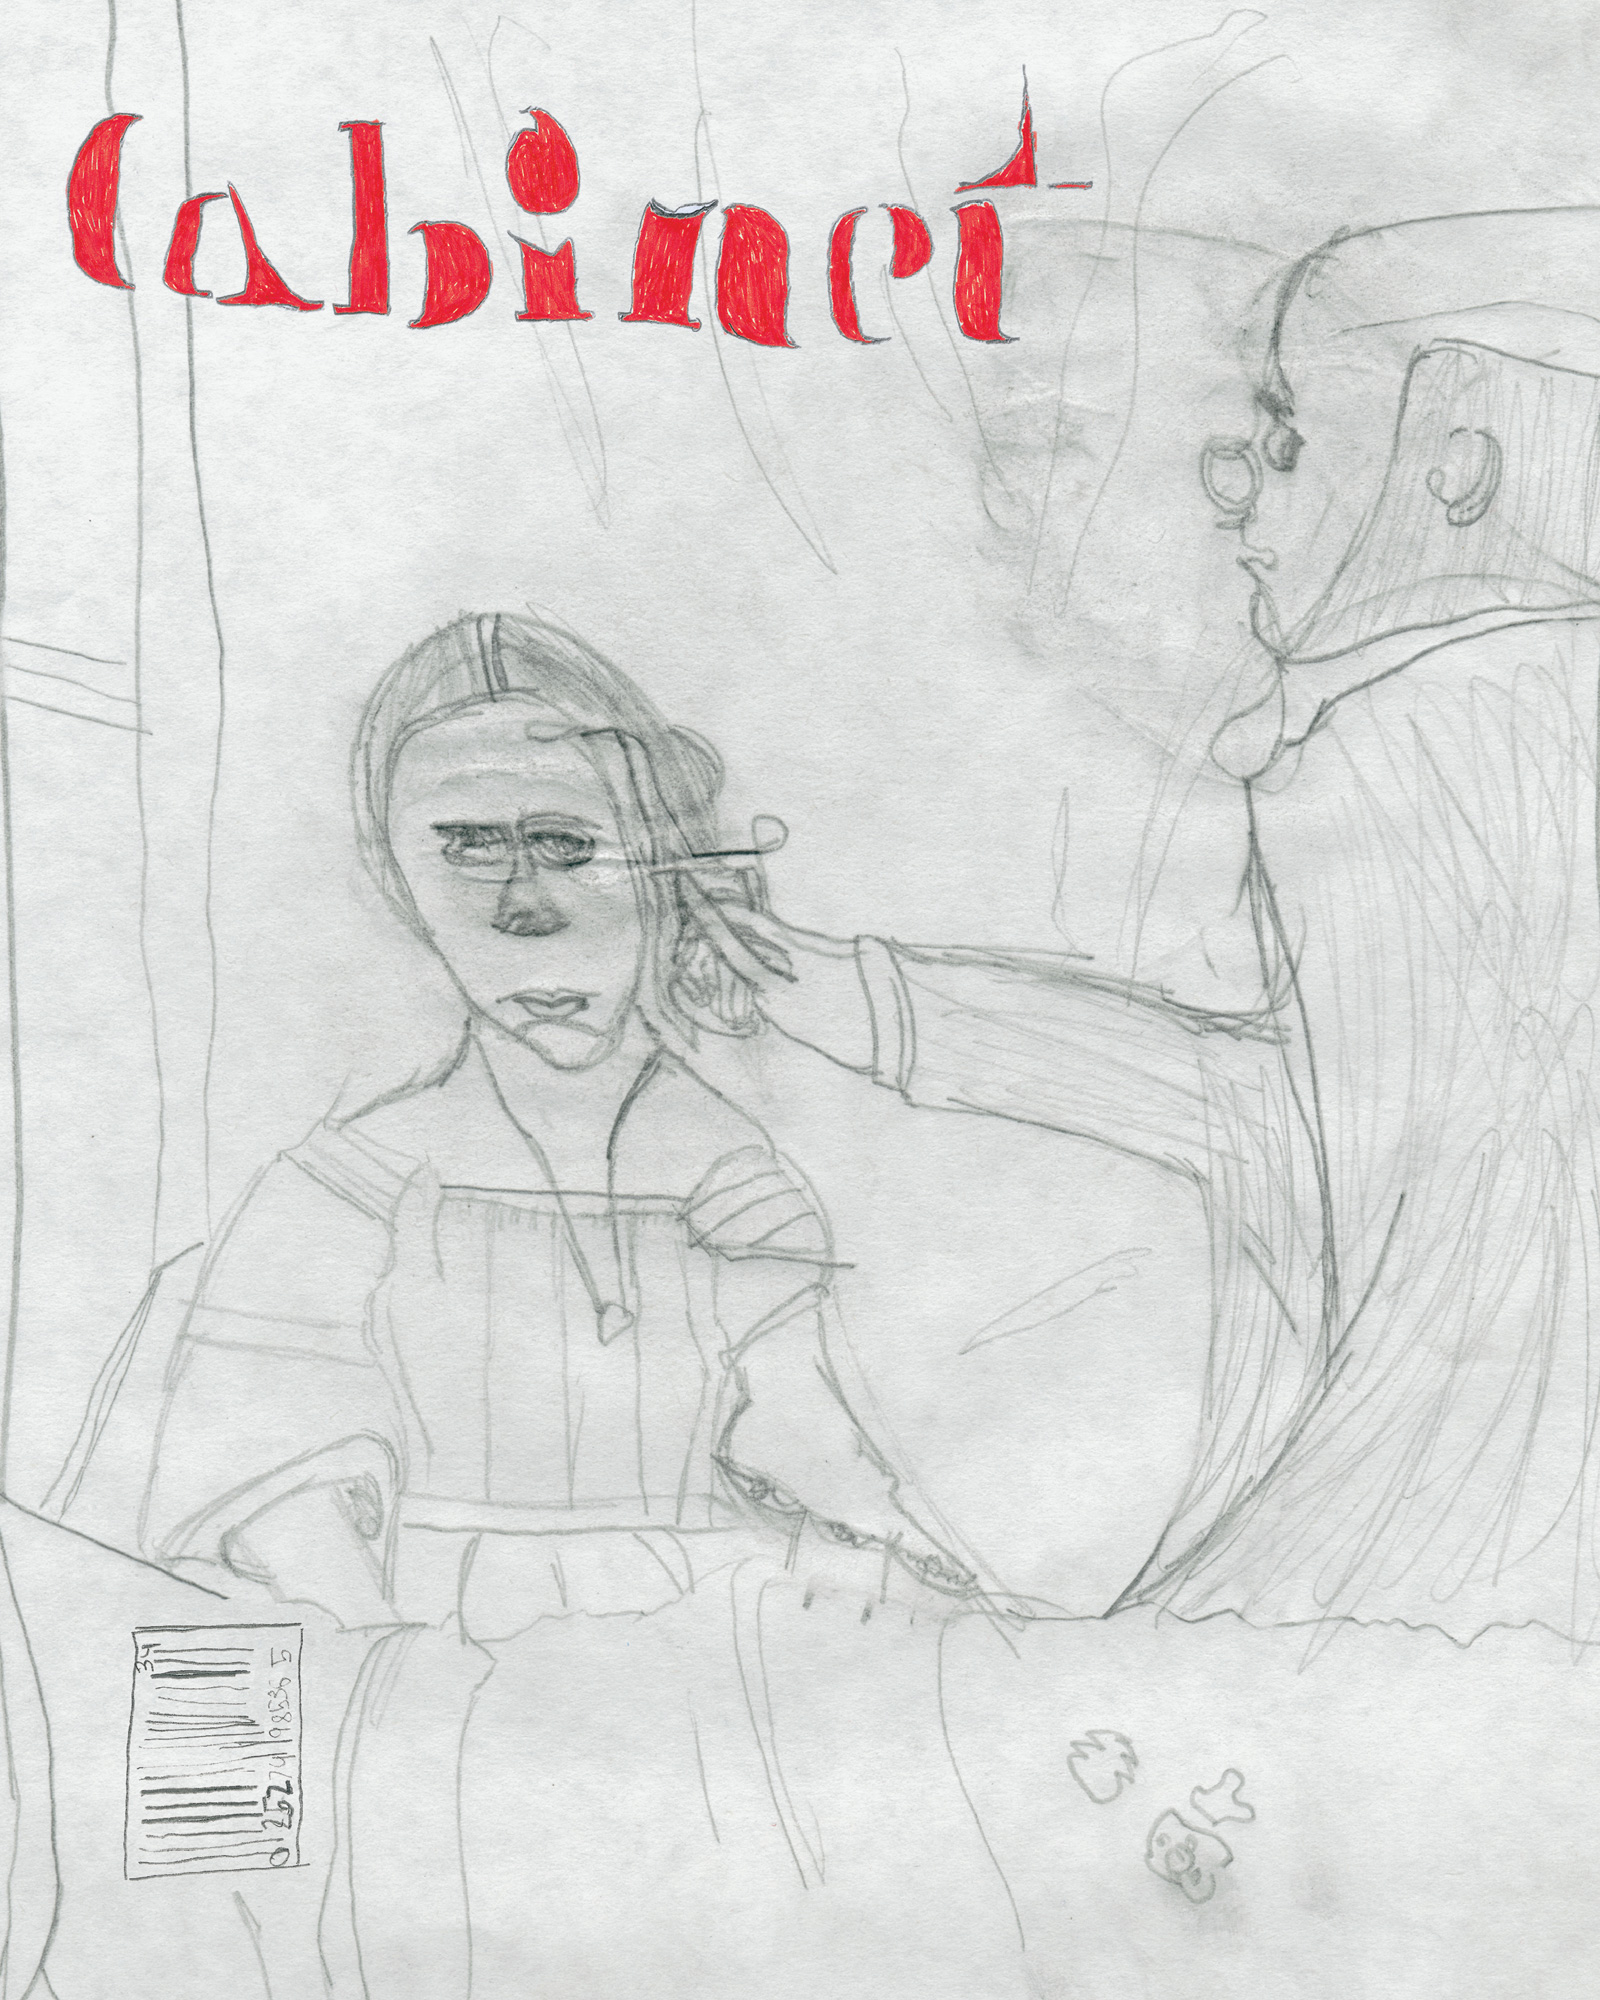 A drawing made by eight-year-old Samuel Kastner of this issue’s cover, including its photographic image, barcode, and Cabinet logotype.